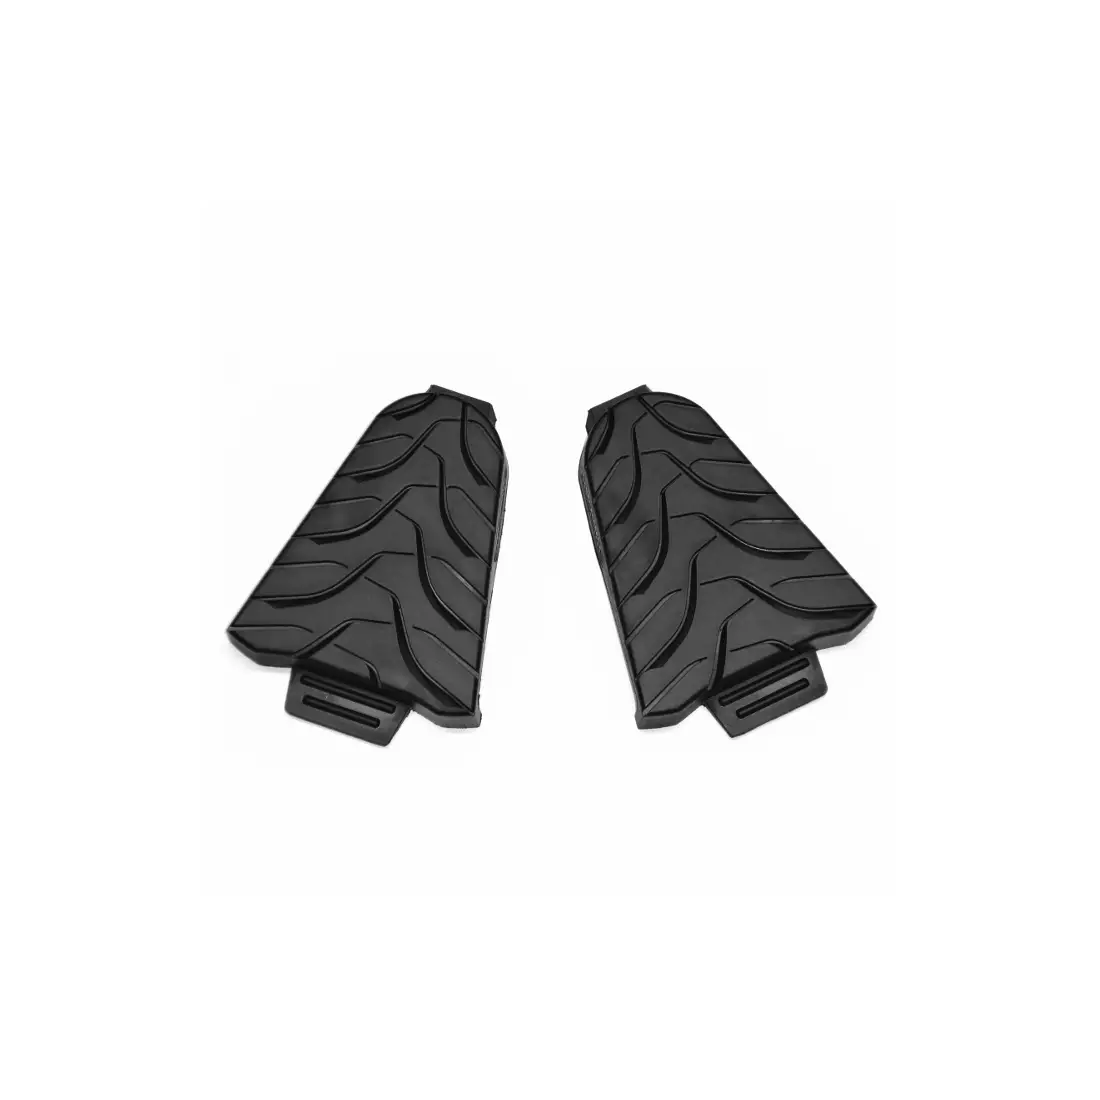 SHIMANO rubber cover for ESMSH45 road cleats